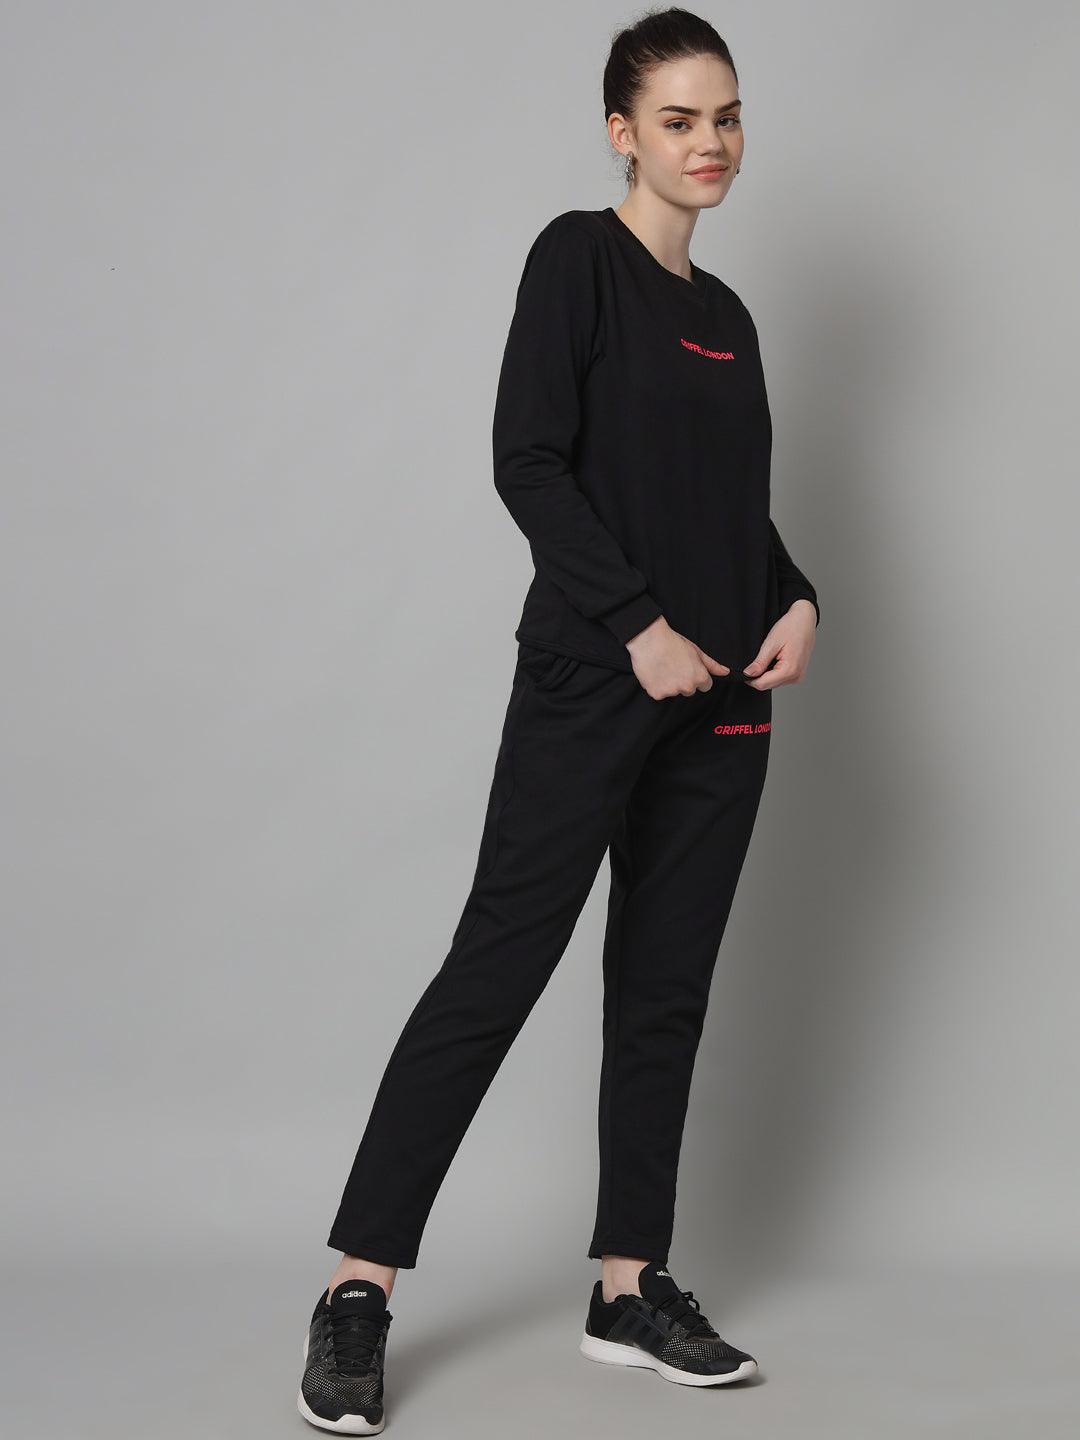 Griffel Women Solid Fleece Basic Round Neck and Joggers Full set Black Tracksuit - griffel